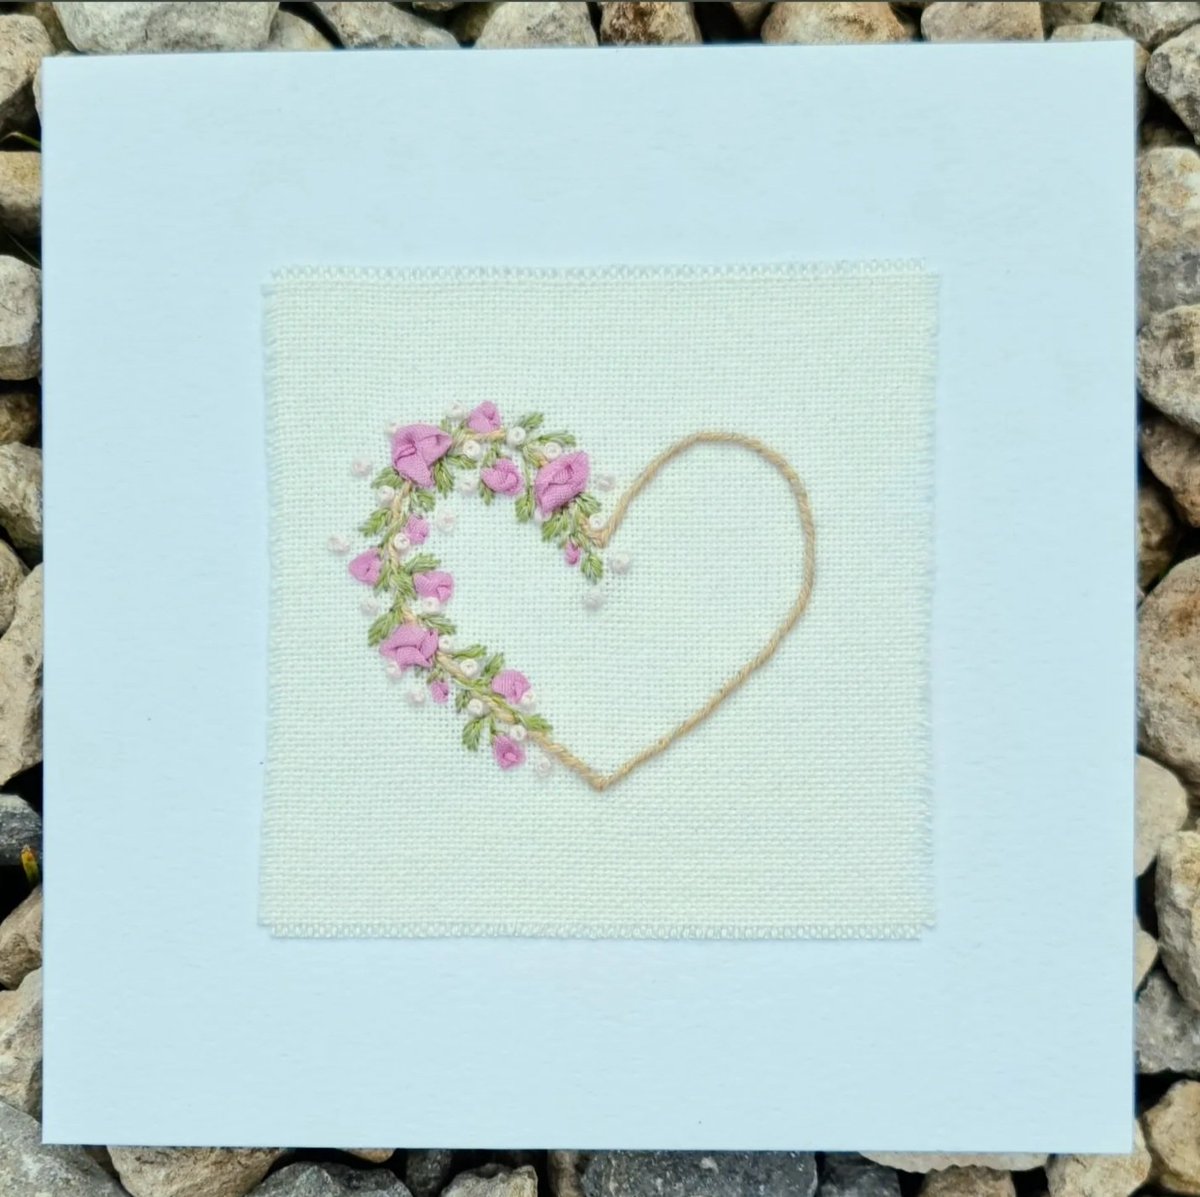 My rose wrapped hearts are another popular design. Another #readymade card with silk ribbon, thread and bead #embroidery. Can also #maketoorder with added greeting and other colours  #HandmadeHour #justacard #crafts